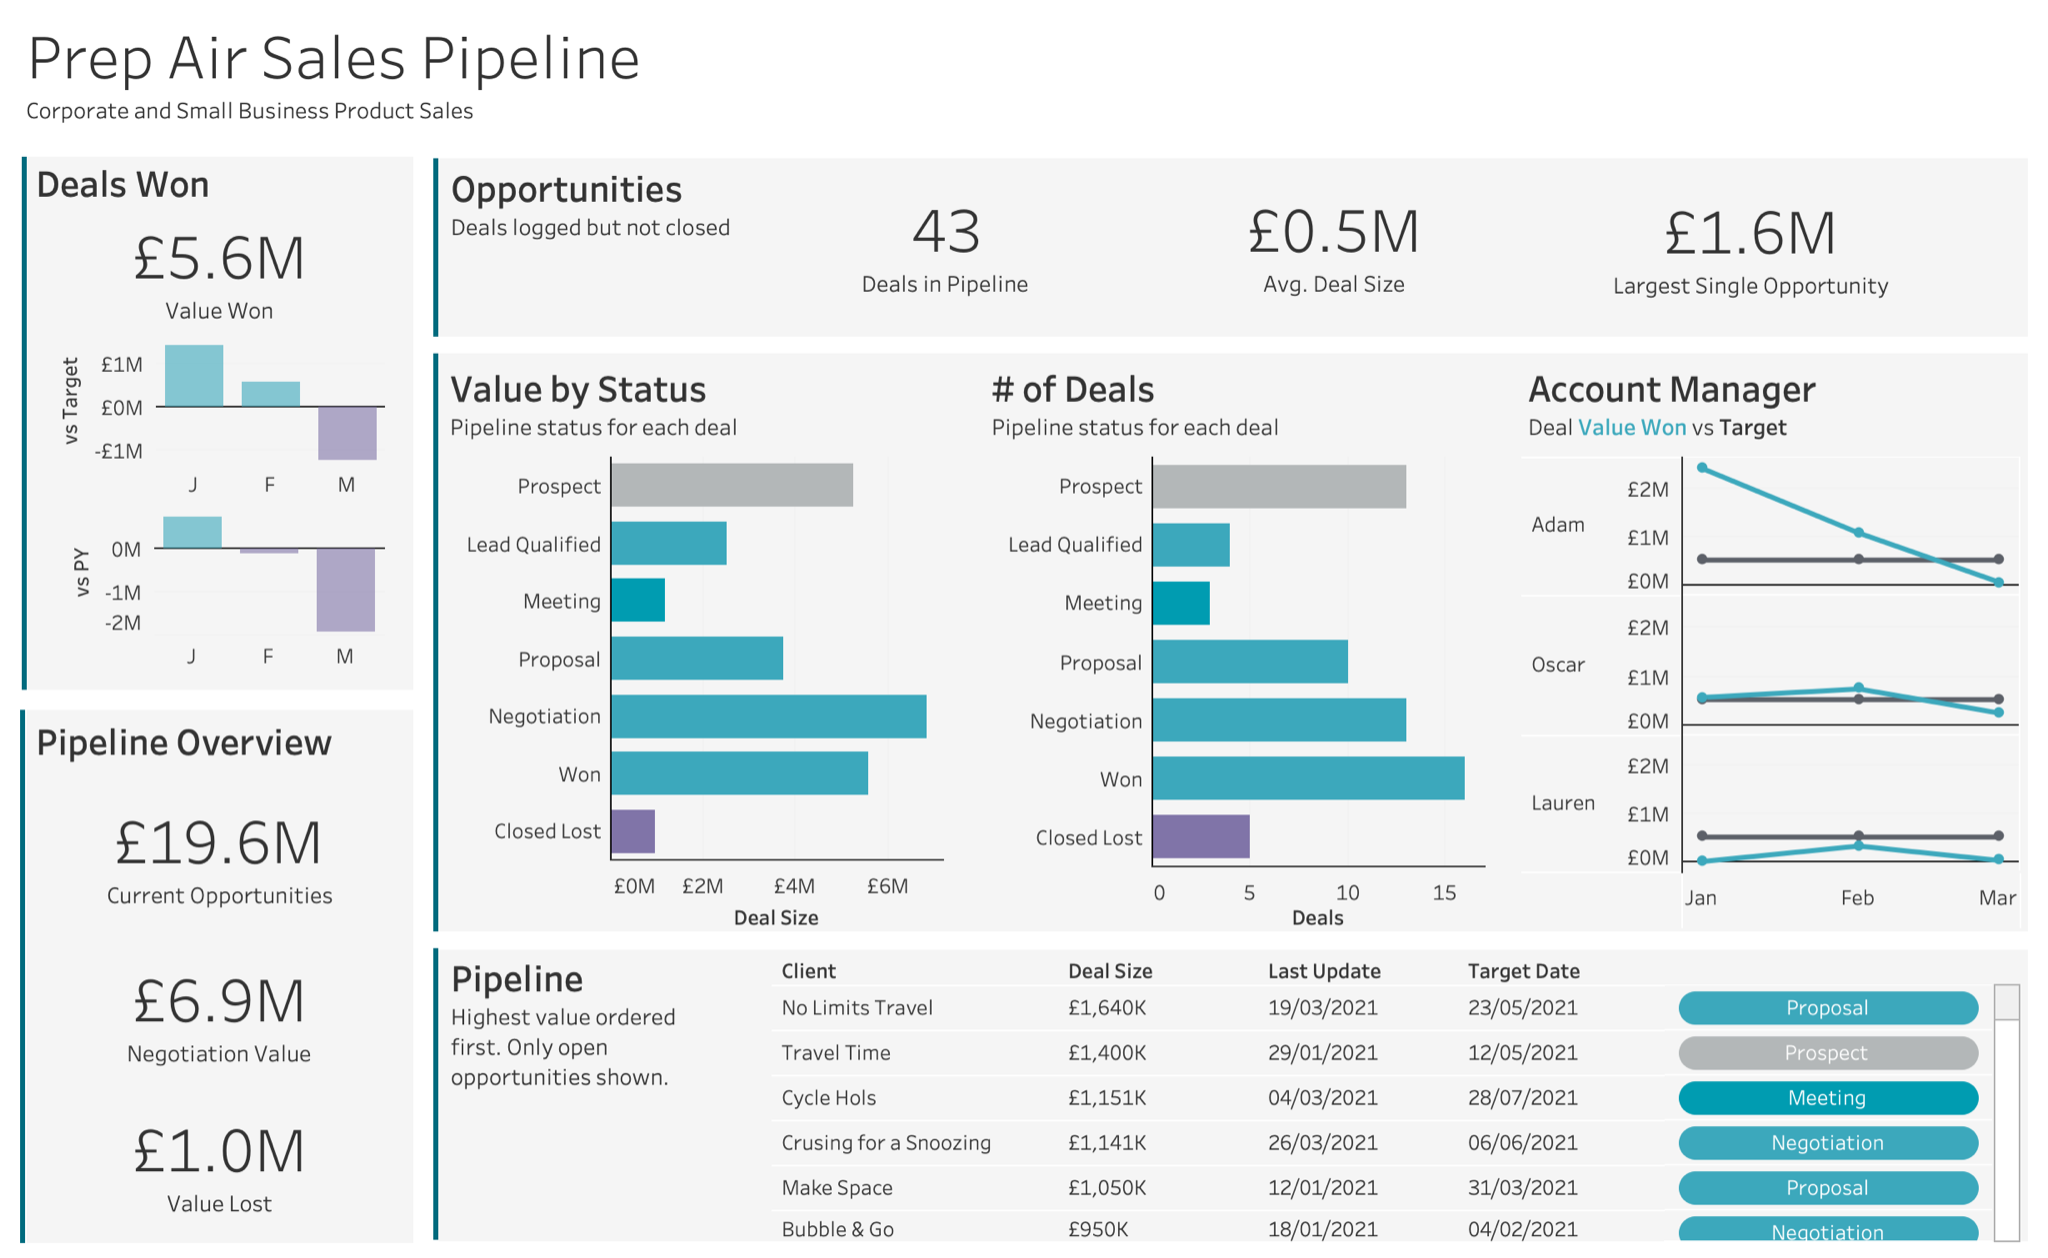   Dashboard showing the Prep Air sales pipeline 